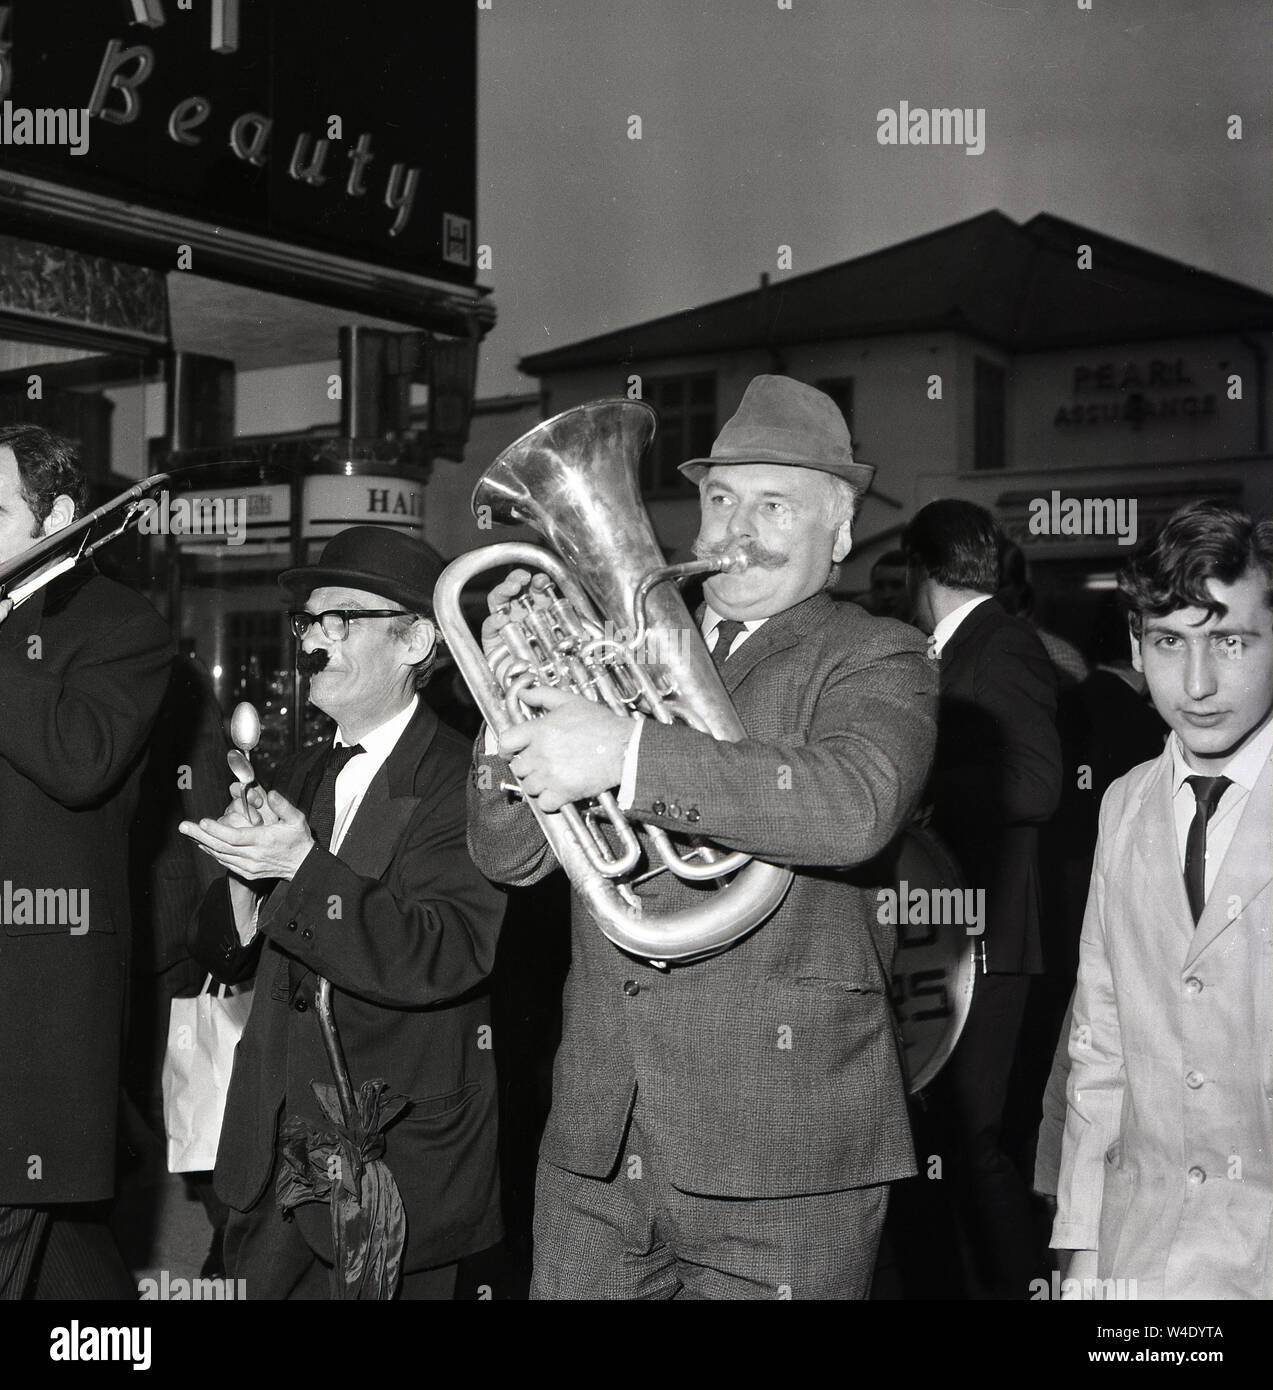 1960s, historical, comedy stars of the radio panel game, 'Does The Team Think'  walking down the street, including Jimmy Edwards, the creator the game, playing a trumbone and one playing the spoons. A British comedy writer and actor, Edwards was famous for his long 'handlebar' moustache. The popular panel game, a parody of 'Any Questions' was played for laughs and ran for nearly twenty years. Stock Photo